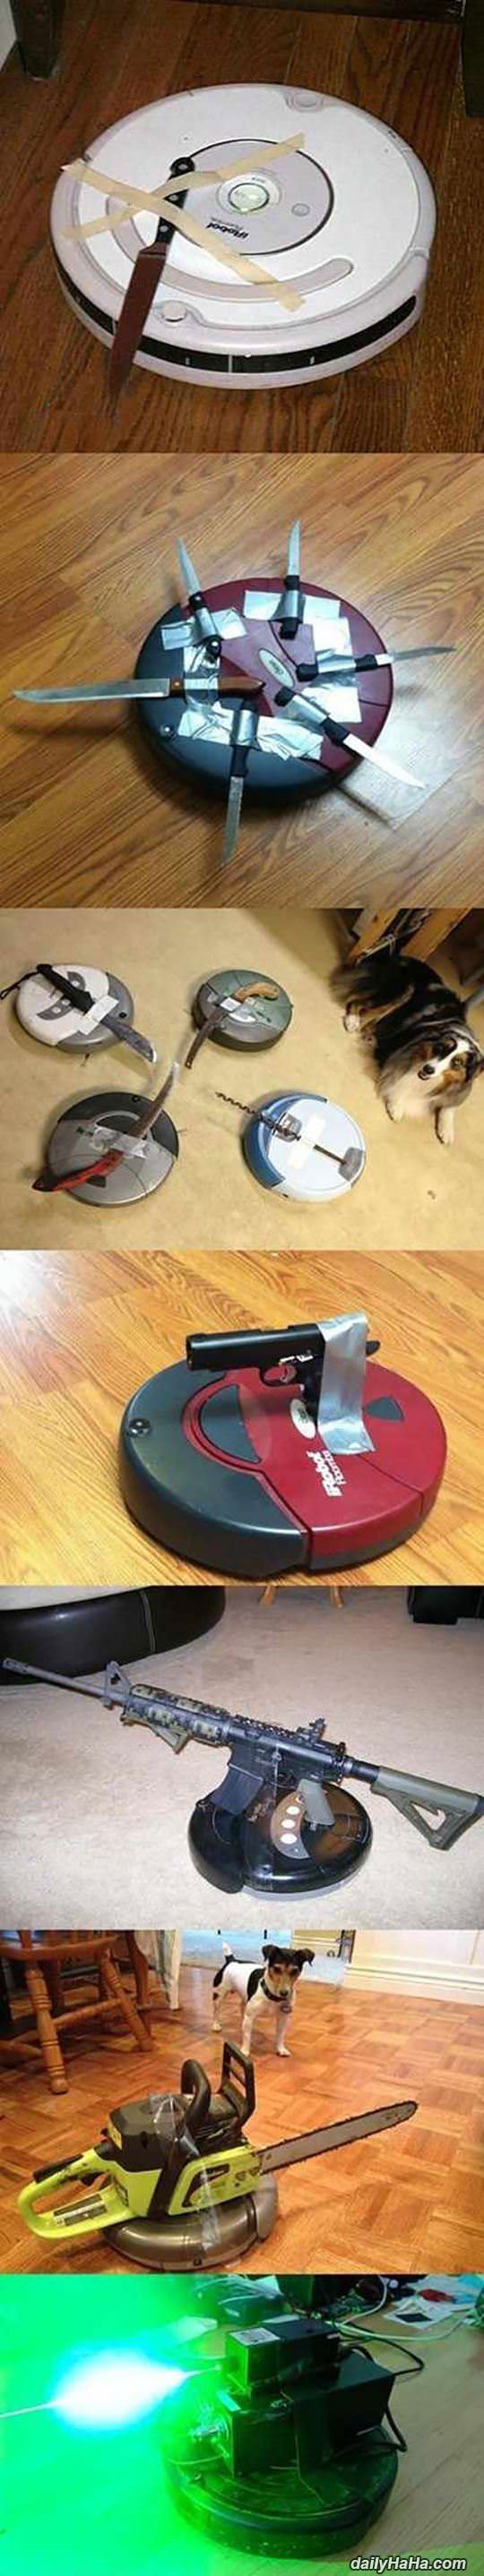 roomba wars funny picture